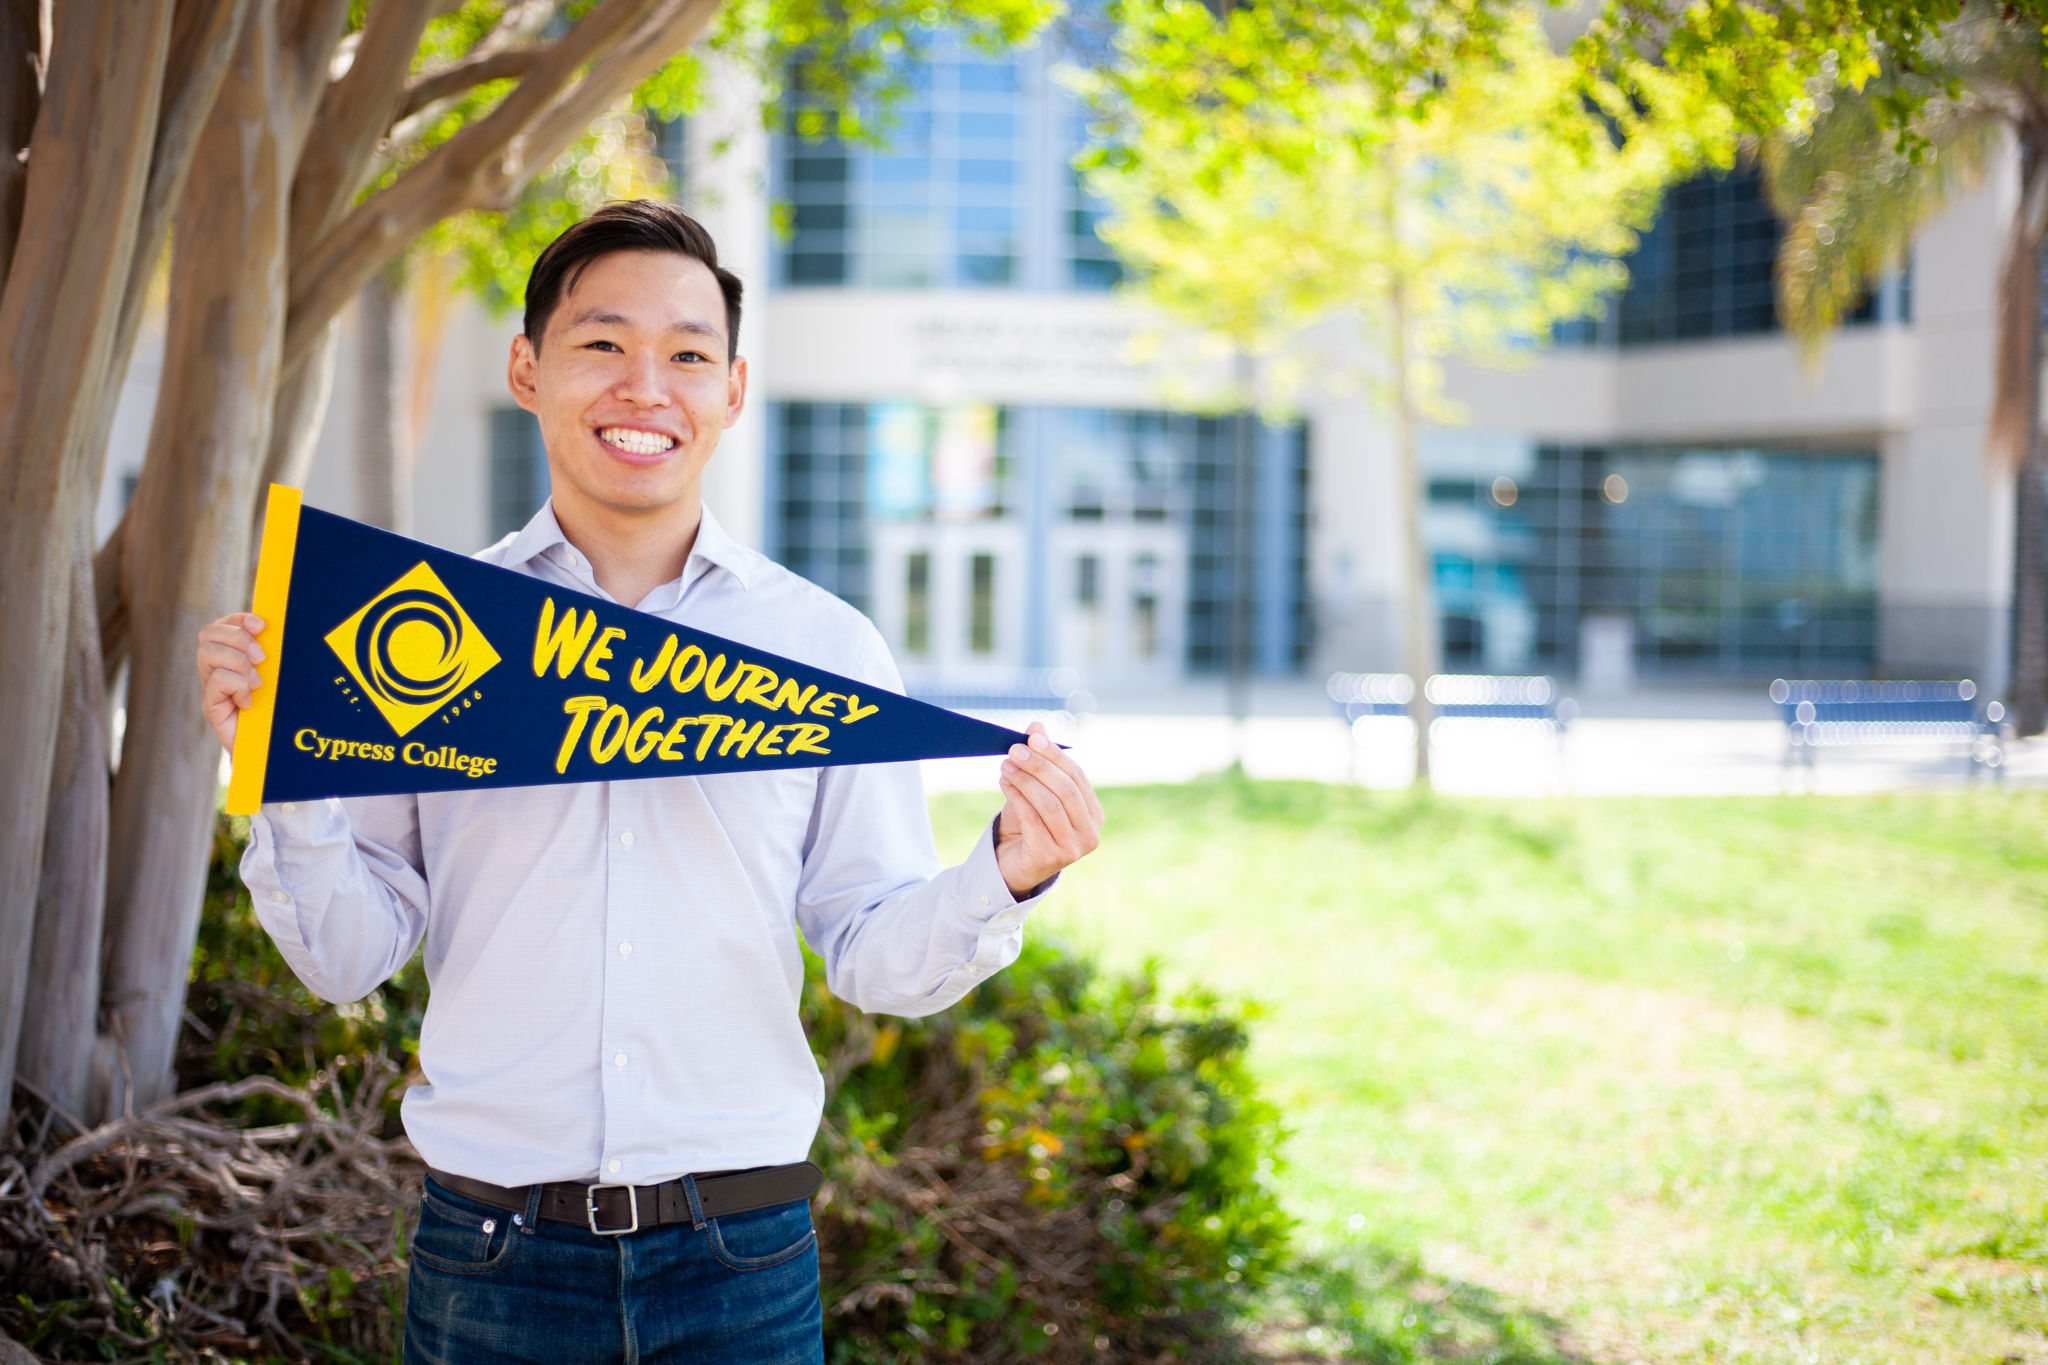 Student Hiroki Funahashi poses with Cypress College "We Journey Together" pennant in front of library. 